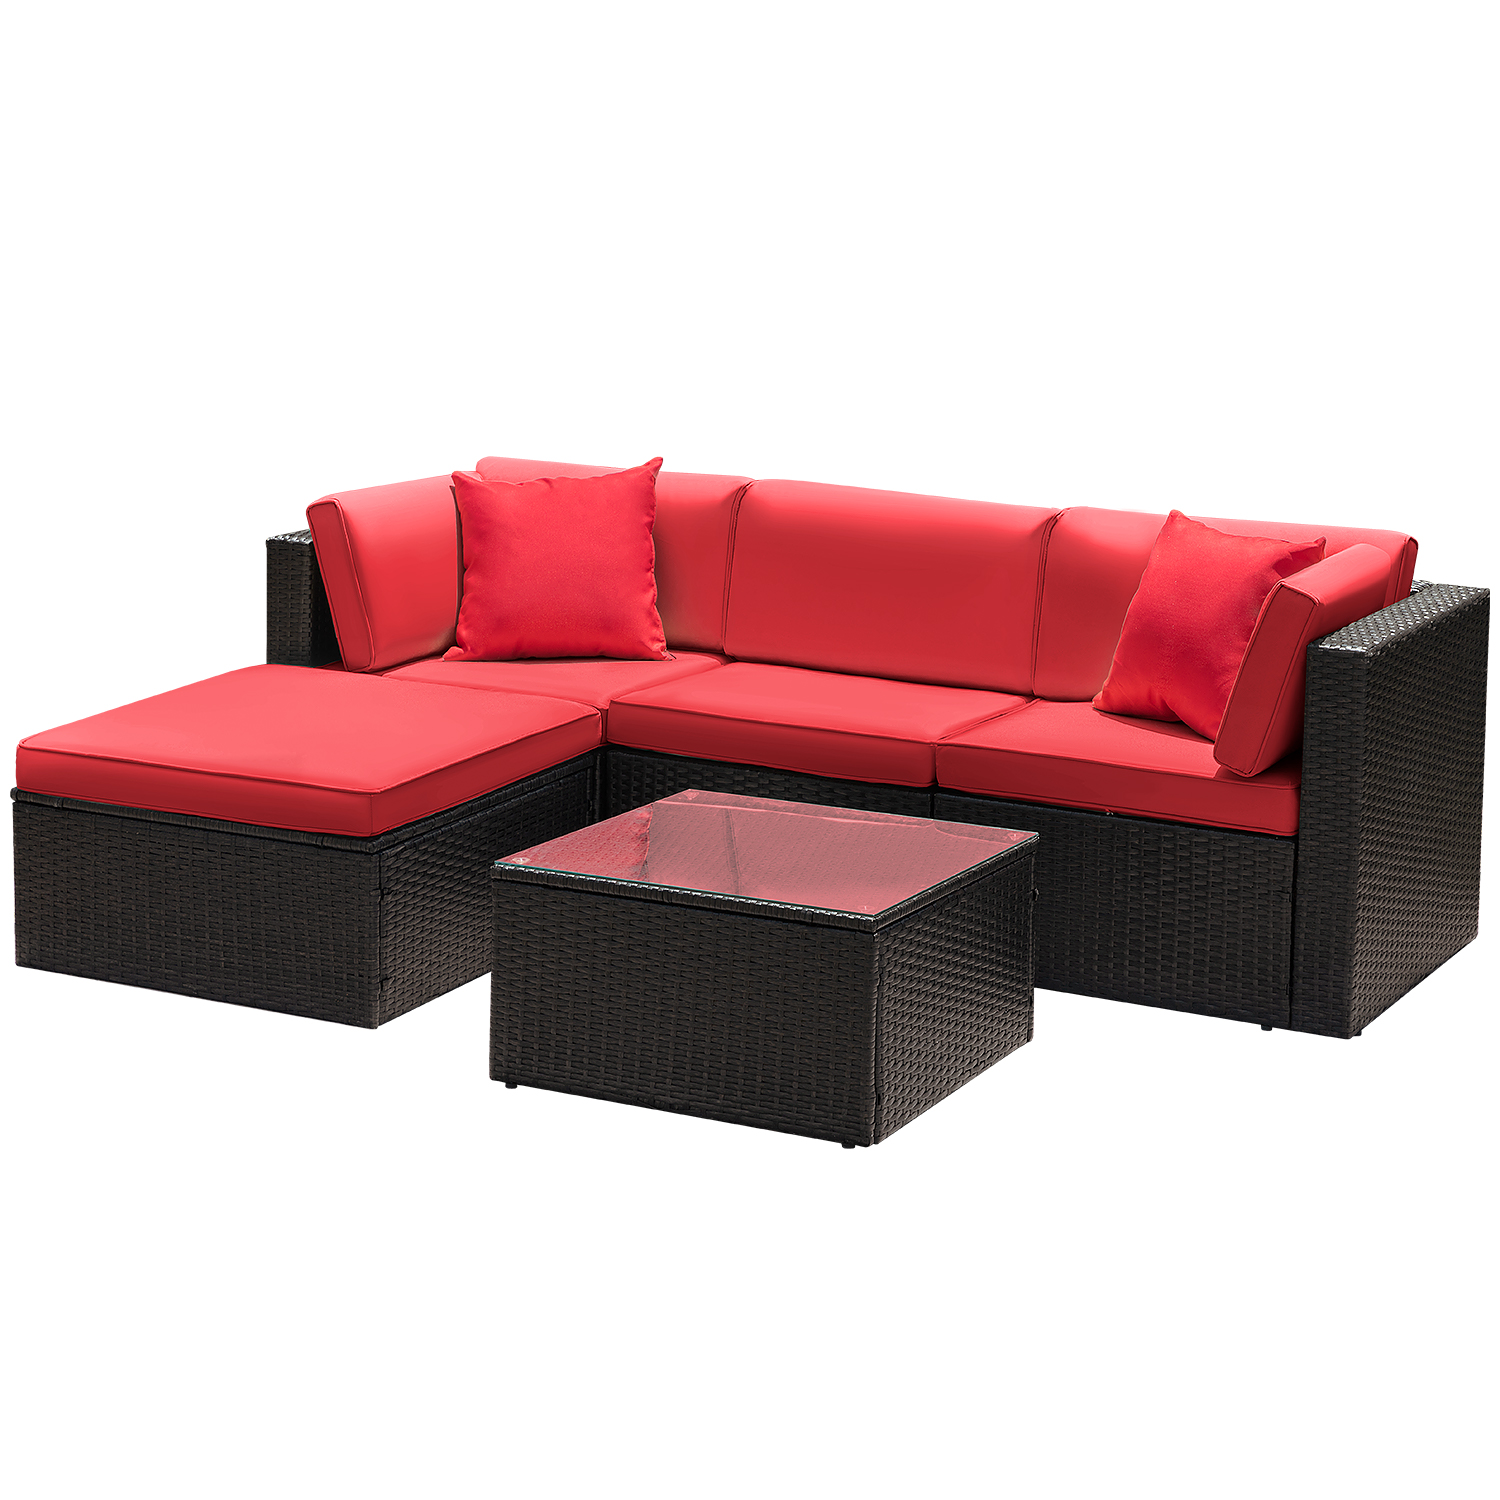 Lacoo 5 Pieces Patio Sectional Sofa Sets All-Weather PE Rattan Conversation Sets With Glass Table, Red - image 3 of 8